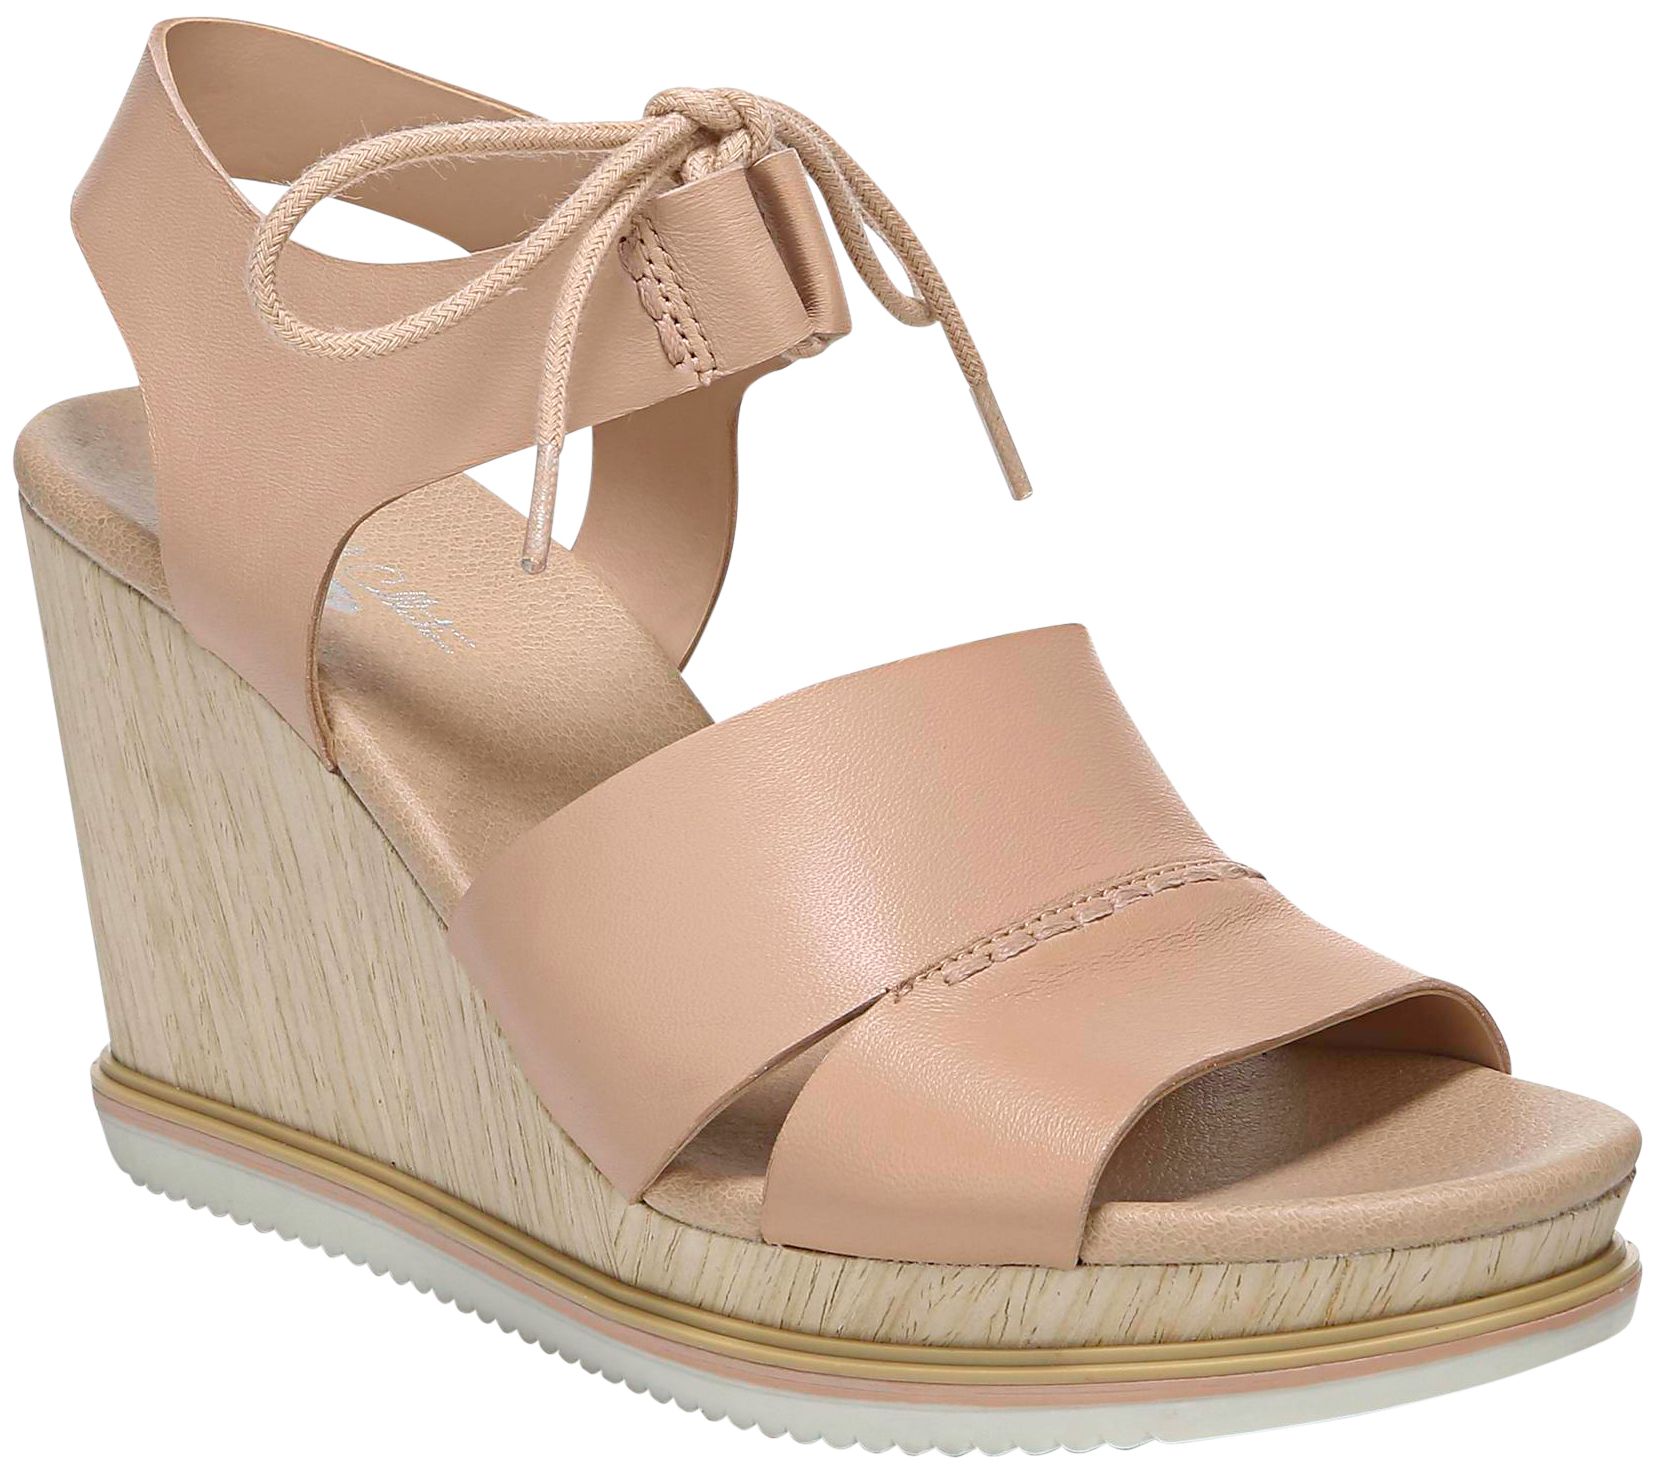 Dr. Scholl's Leather Wedge Sandals 